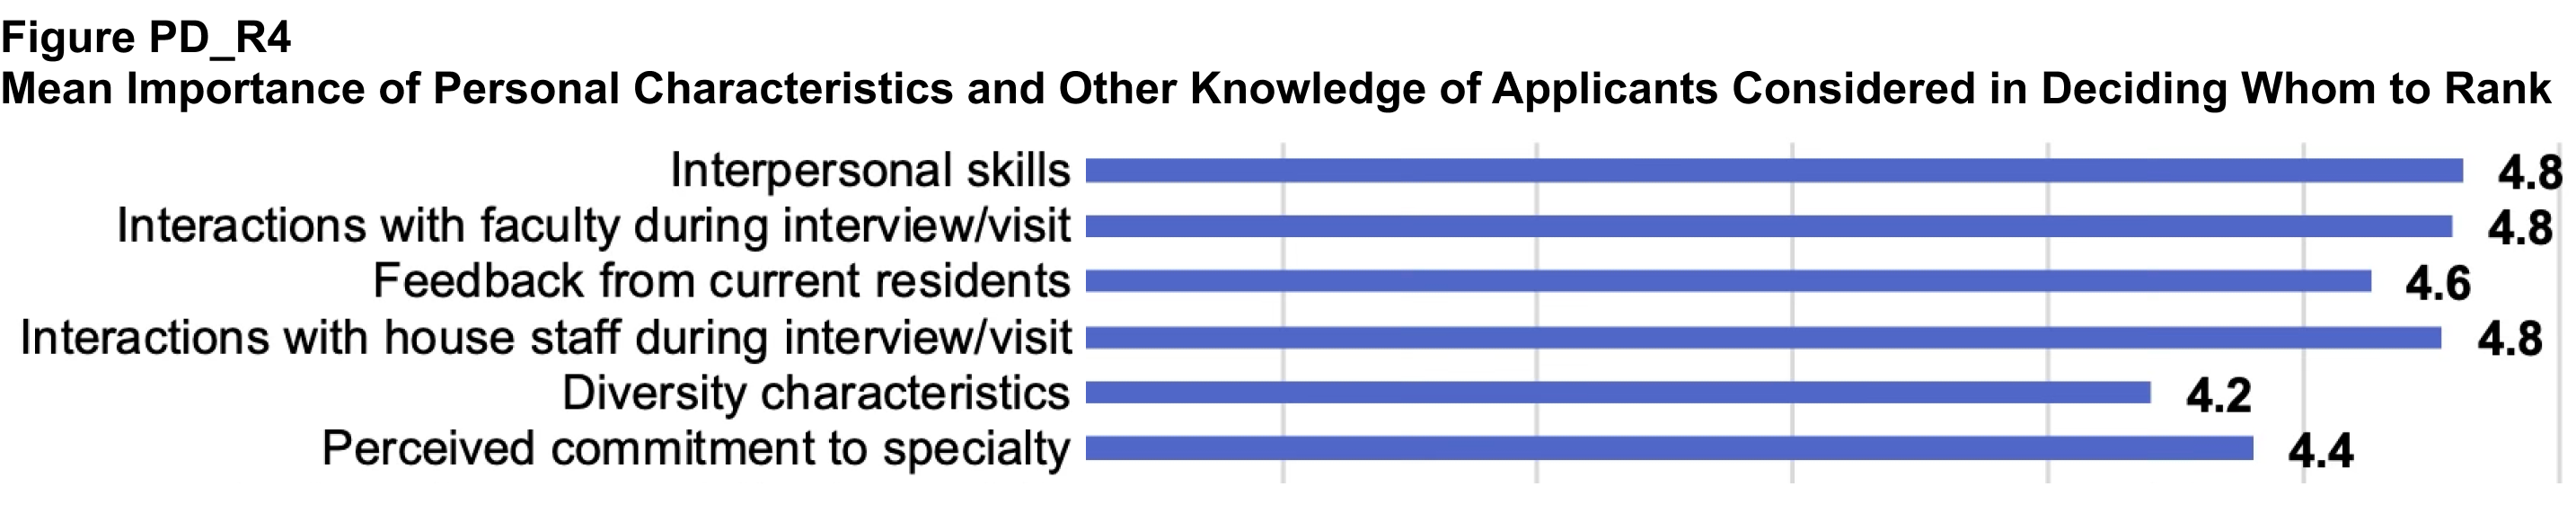 Mean Importance of Personal Characteristics and Other Knowledge of Applicants Considered in Deciding Whom to Rank